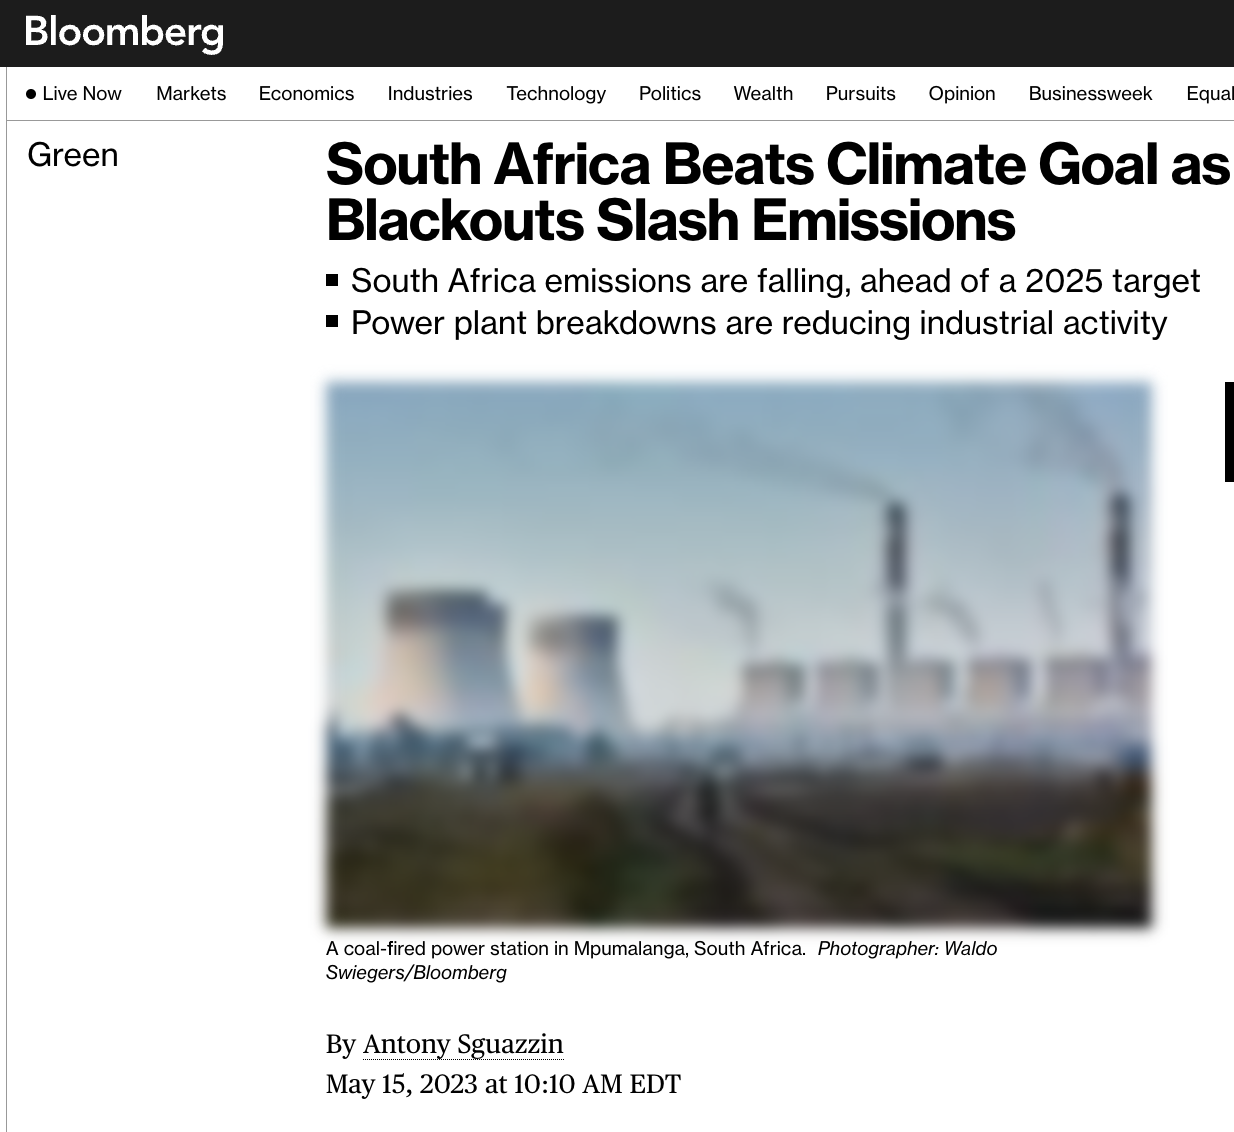 Bloomberg News: ‘South Africa Beats Climate Goal as Blackouts Slash Emissions’ – ‘Unintentional…power plant breakdowns are reducing industrial activity’